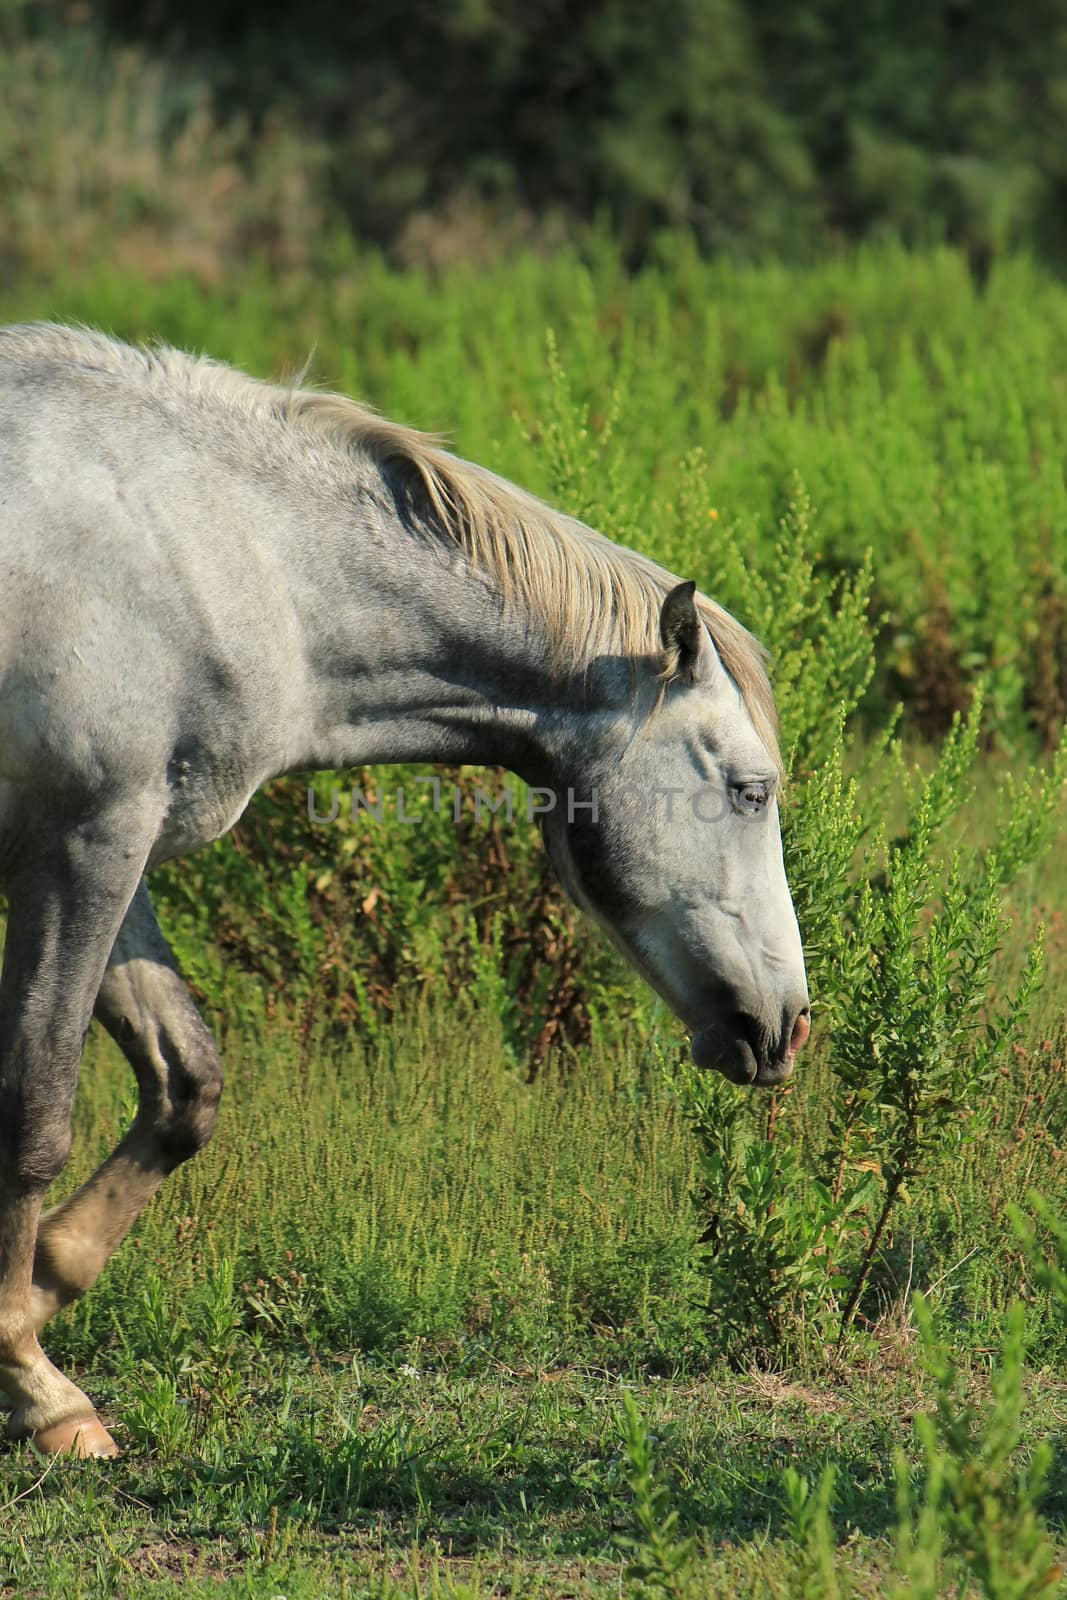 Typical camargue grey horse walking in a meadow in nature, Camargue, France